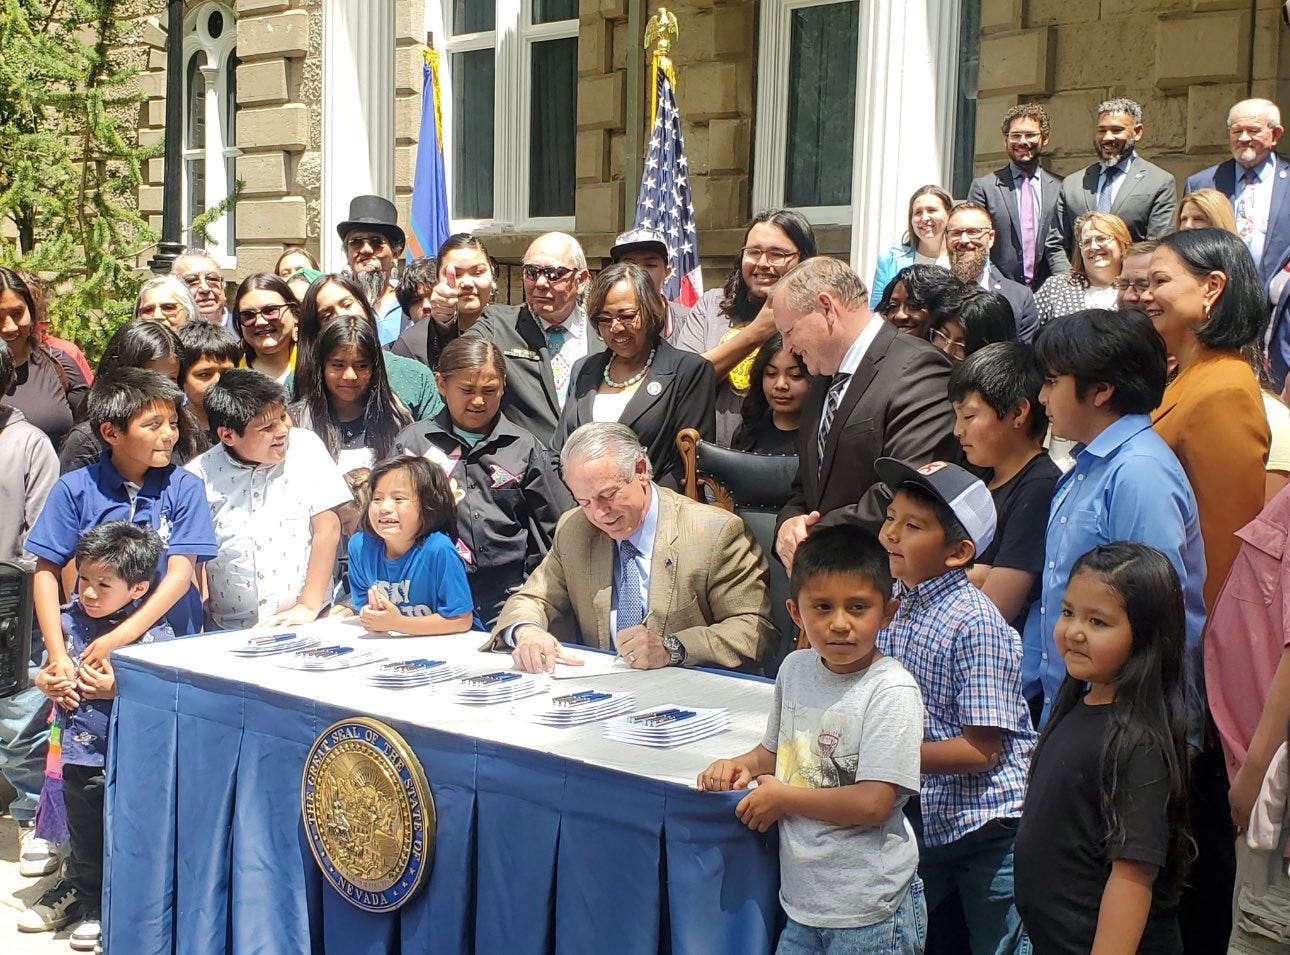 Nevada Governor Joe Lombardo seated at table signing Assembly Bill 519. He is surrounded by children and tribal leaders from the Duck Valley Reservation and Nevada Legislative members.